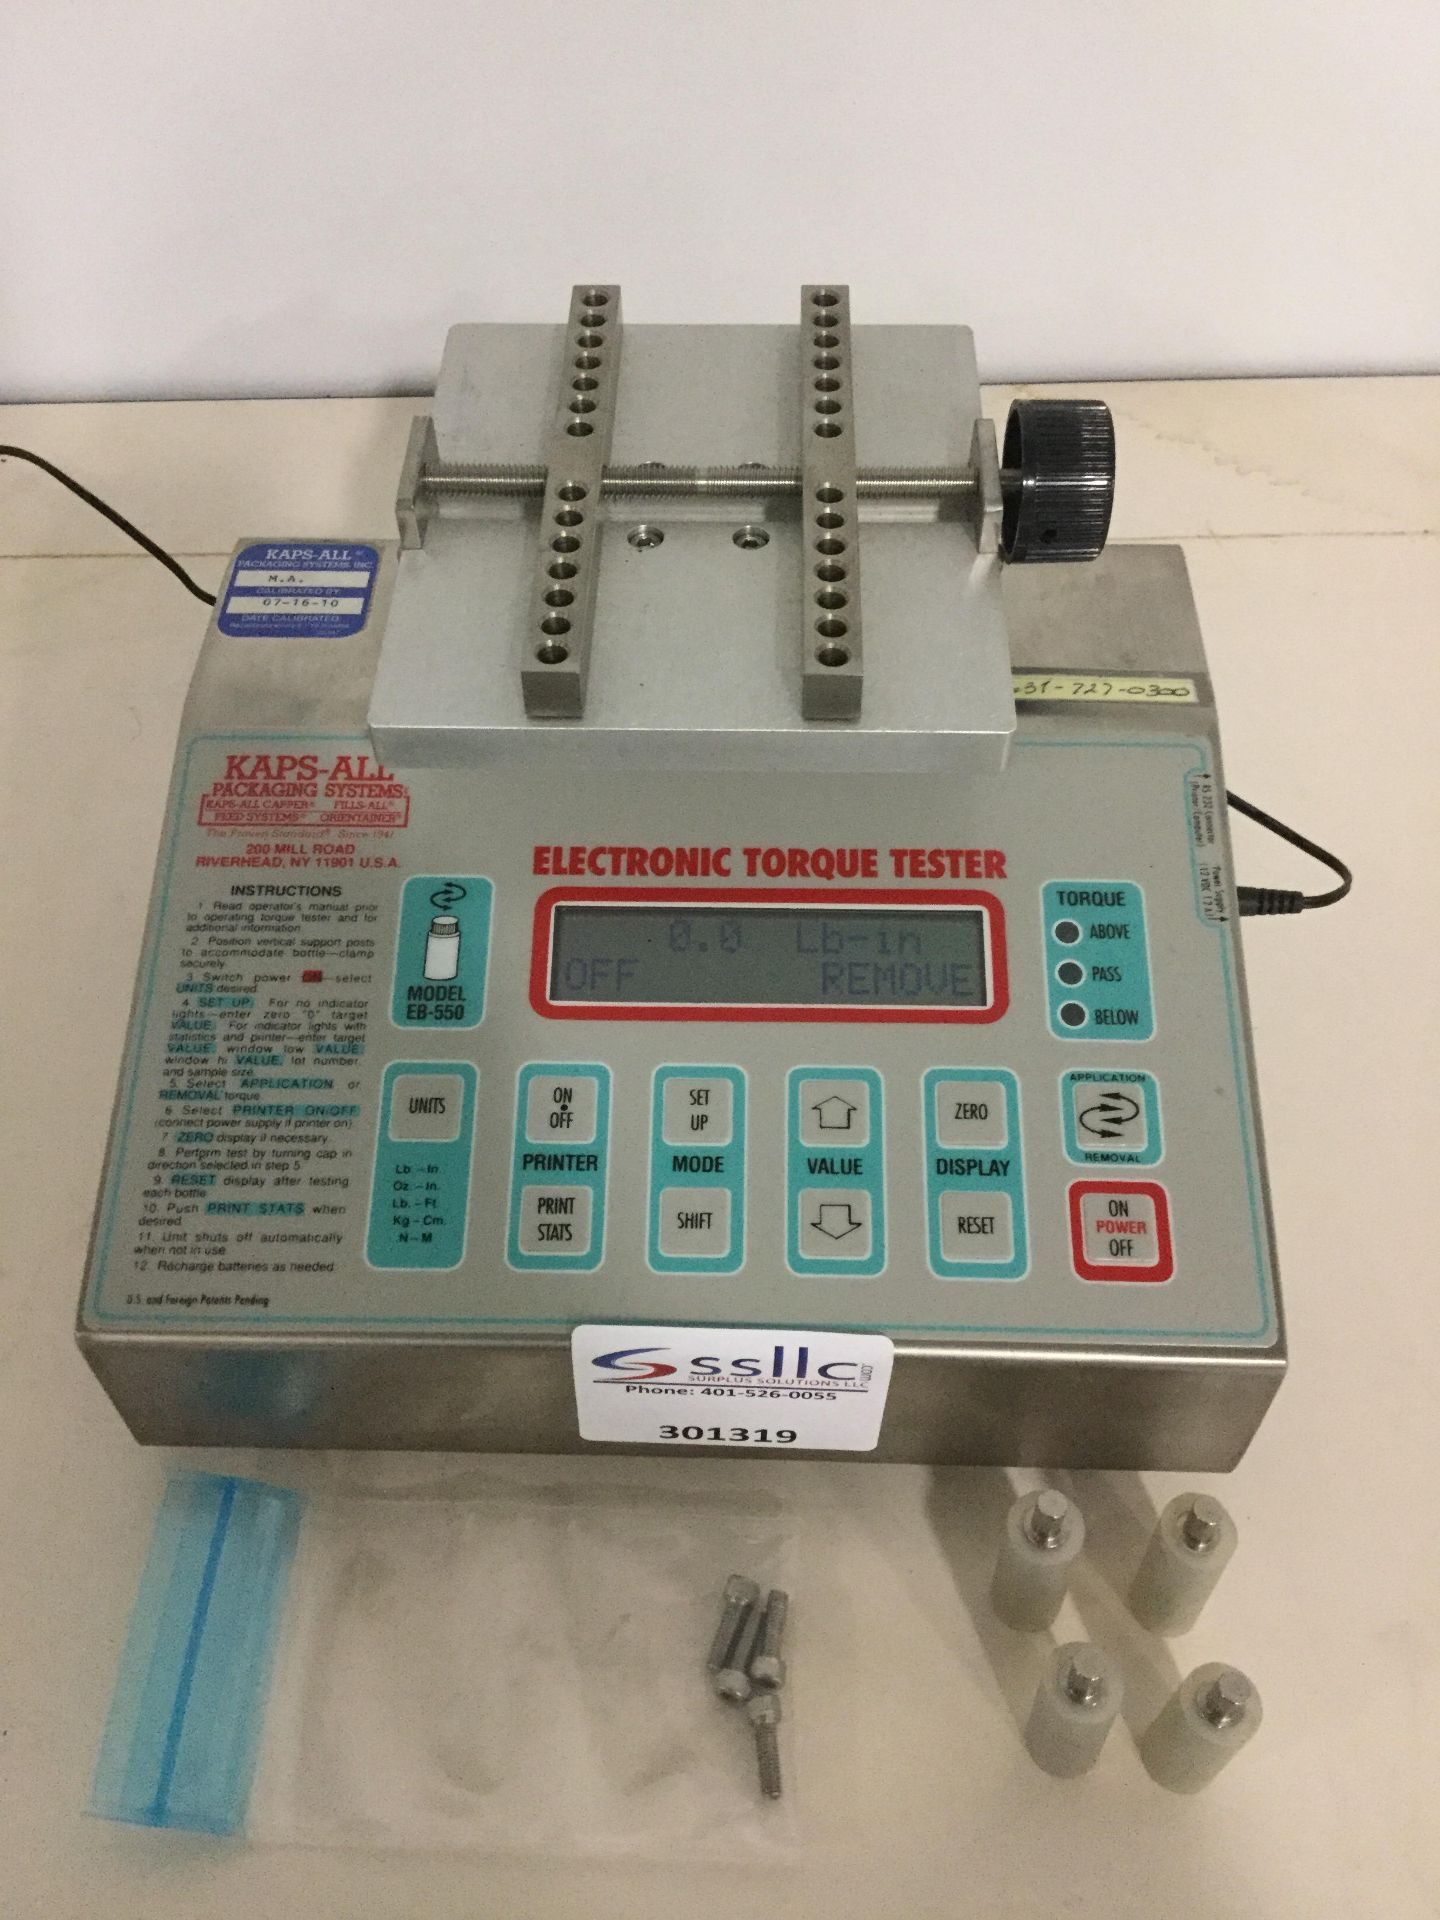 Kaps-All Packaging Systems EB550 Electronic Torque Tester